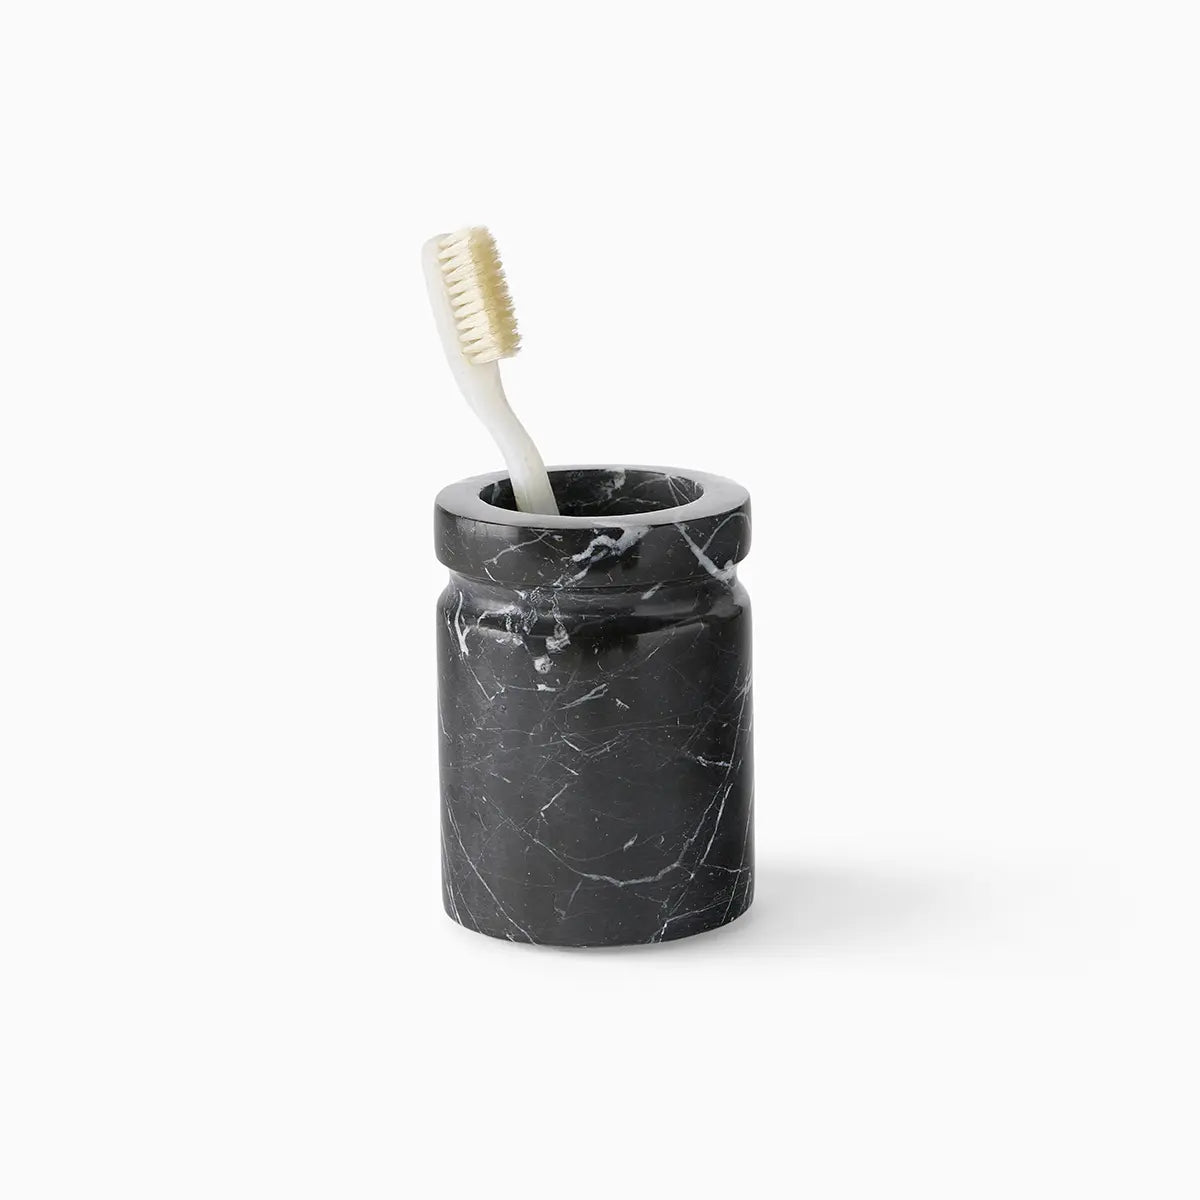 Sferra Marquina Tooth Brush holder in Black Marble with Toothbrush inside